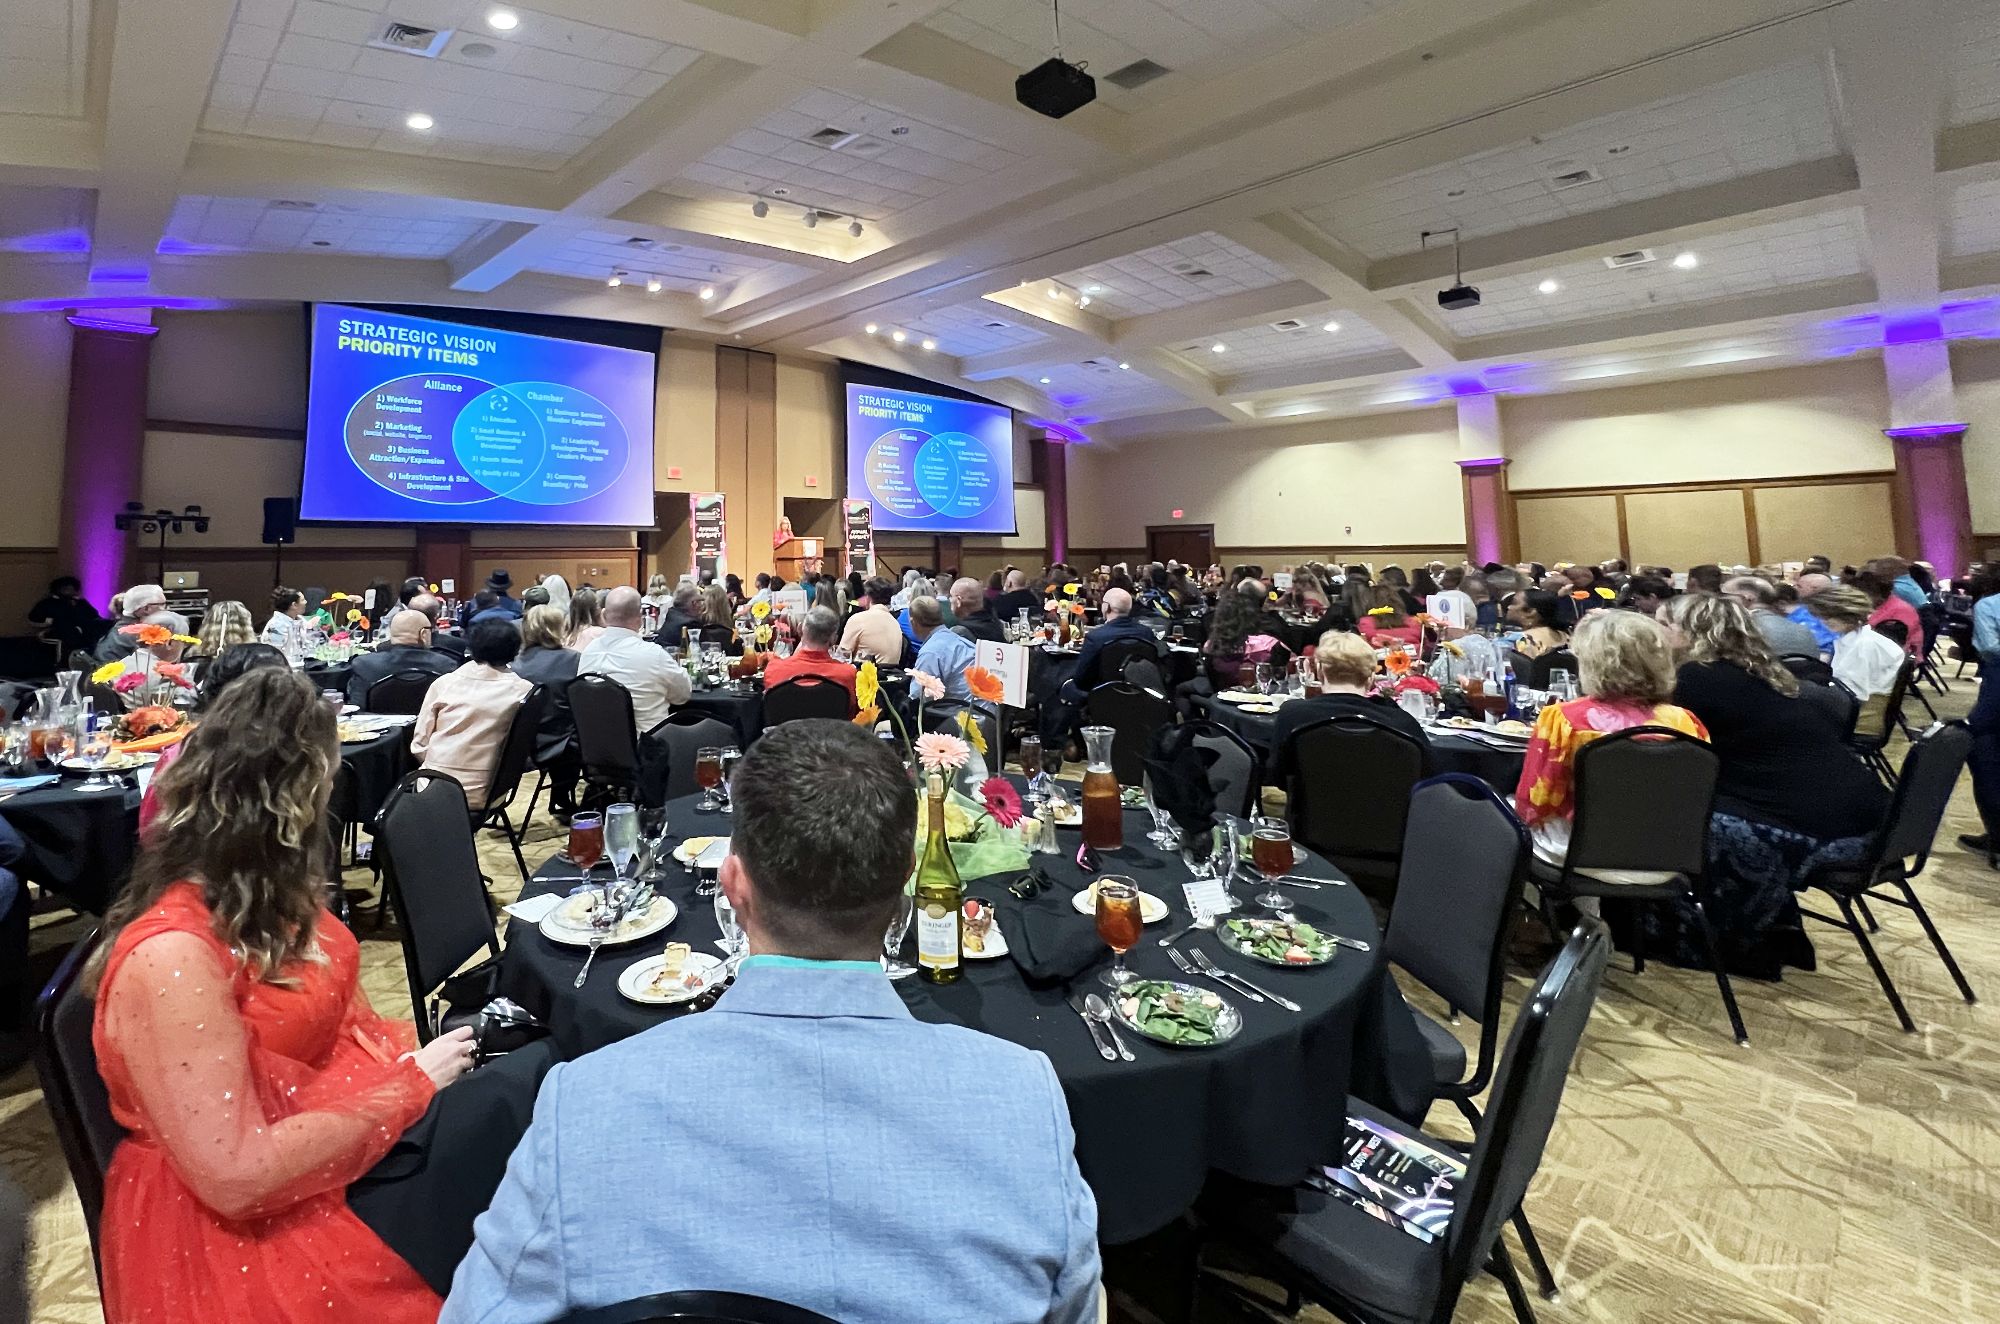 Annual Chamber Banquet Celebrates  Community and Progress in Clark County